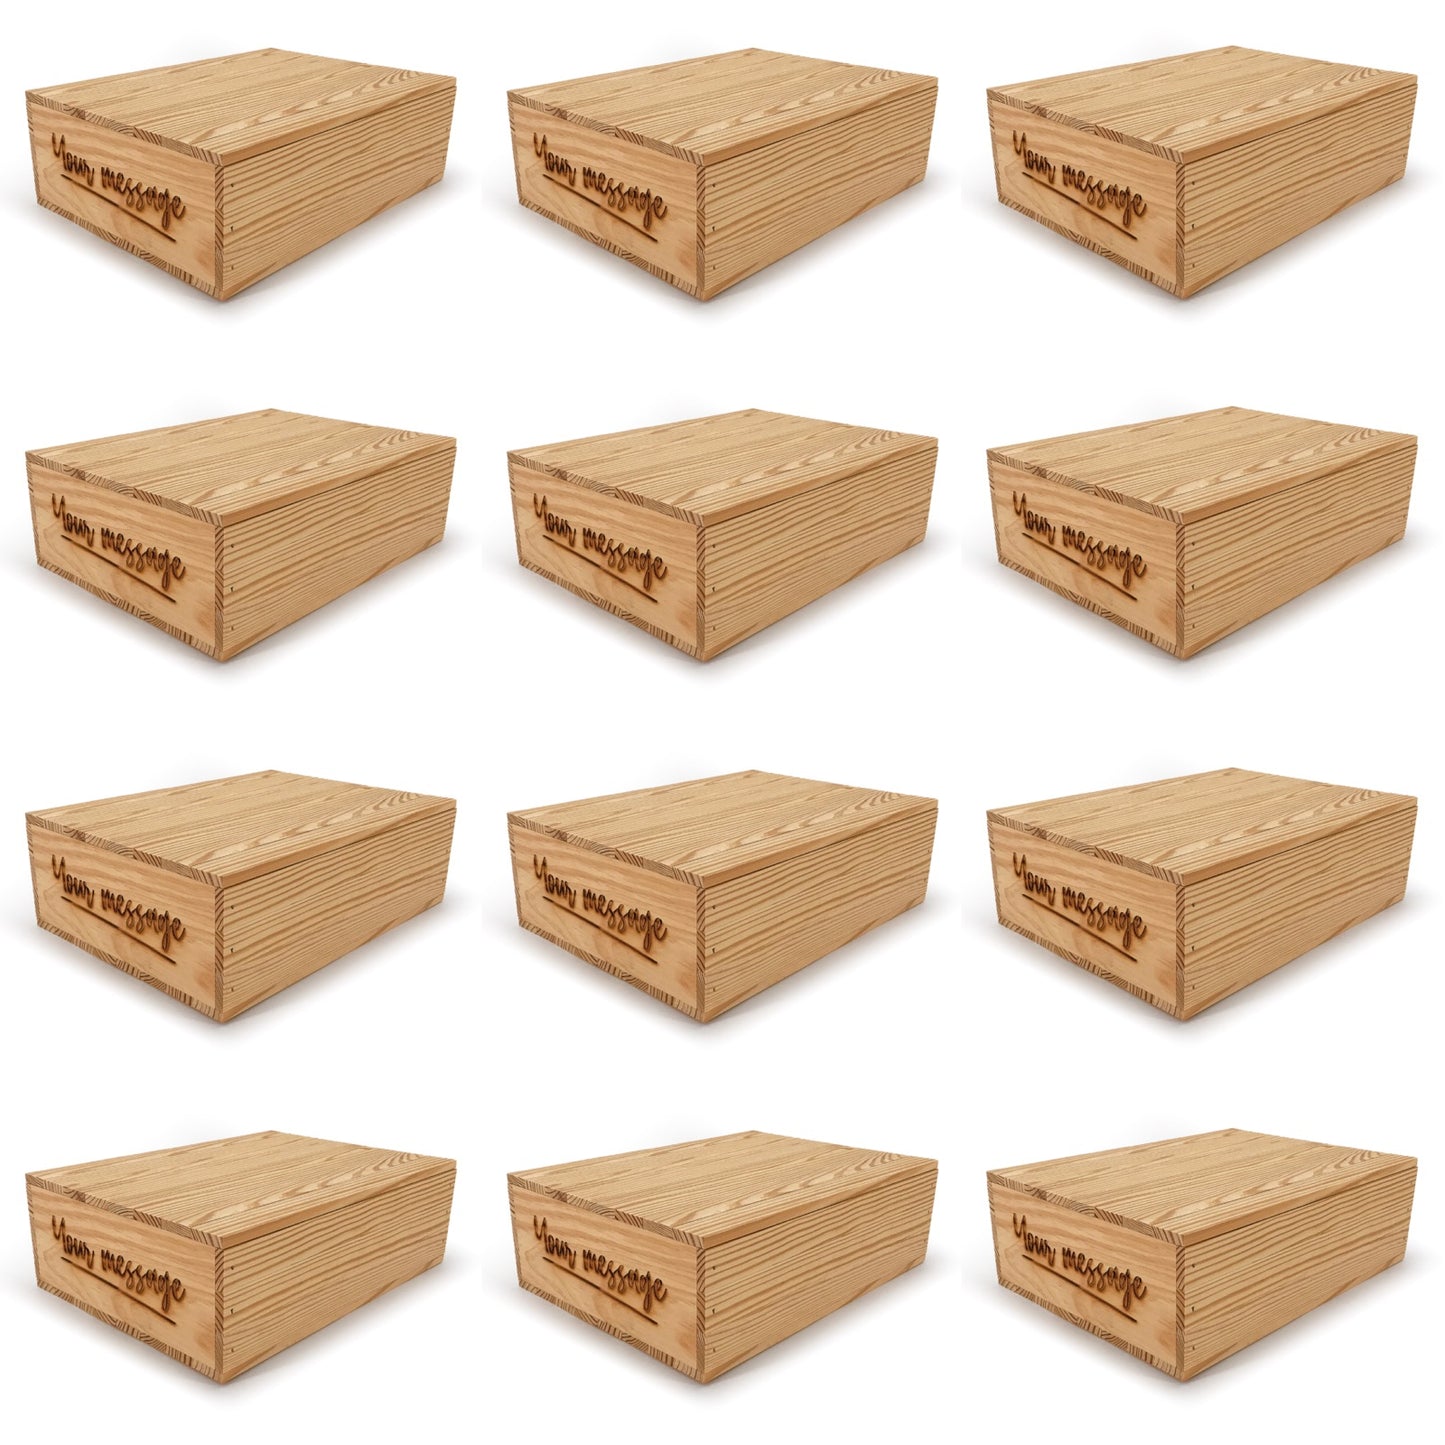 12 Small wooden crates with lid and custom message 14x10x4.25